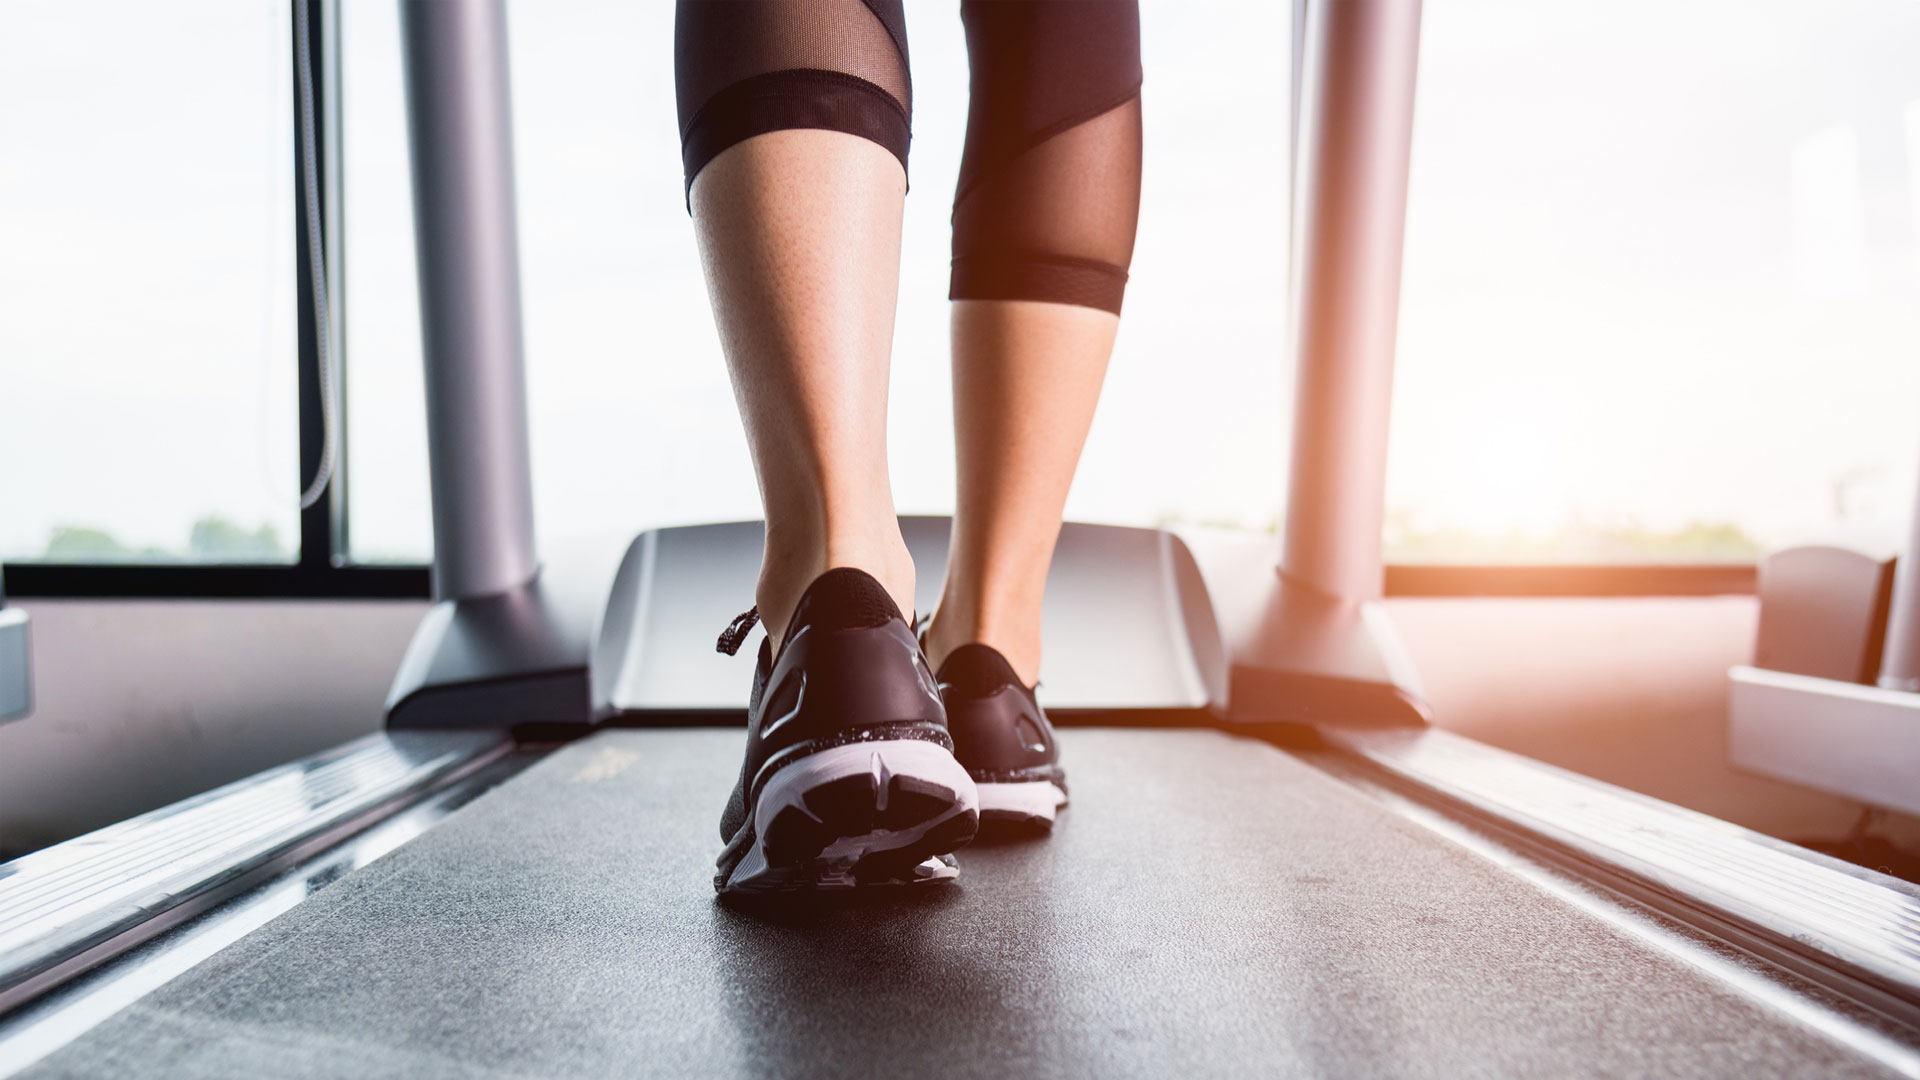 image of running shoes on treadmill